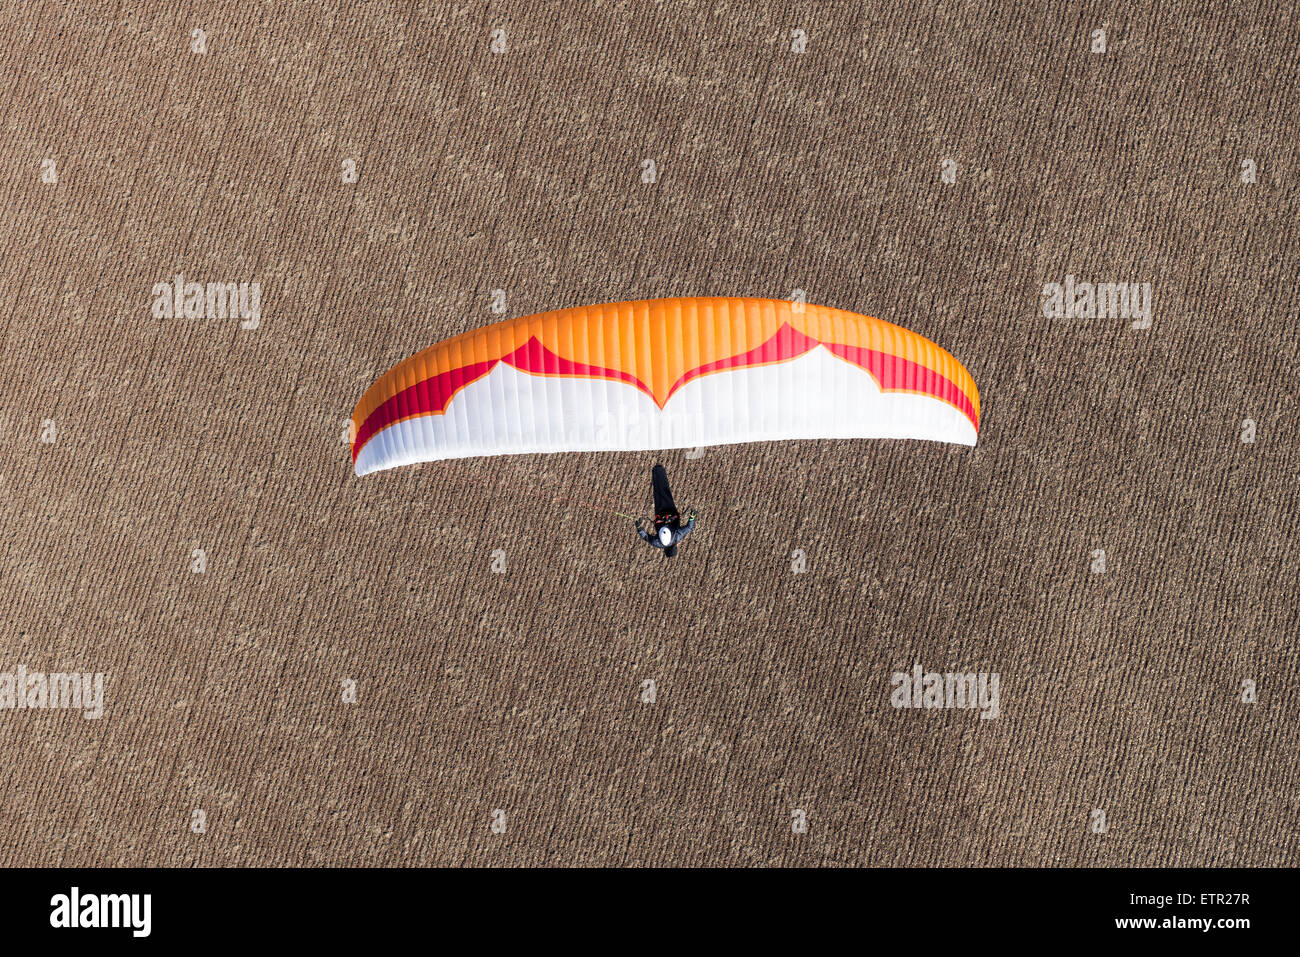 Paraglider, Paragliding, natural forms, Algodonales, sport, Andalusia, summer, vacation, province of Cadiz, Spain Stock Photo